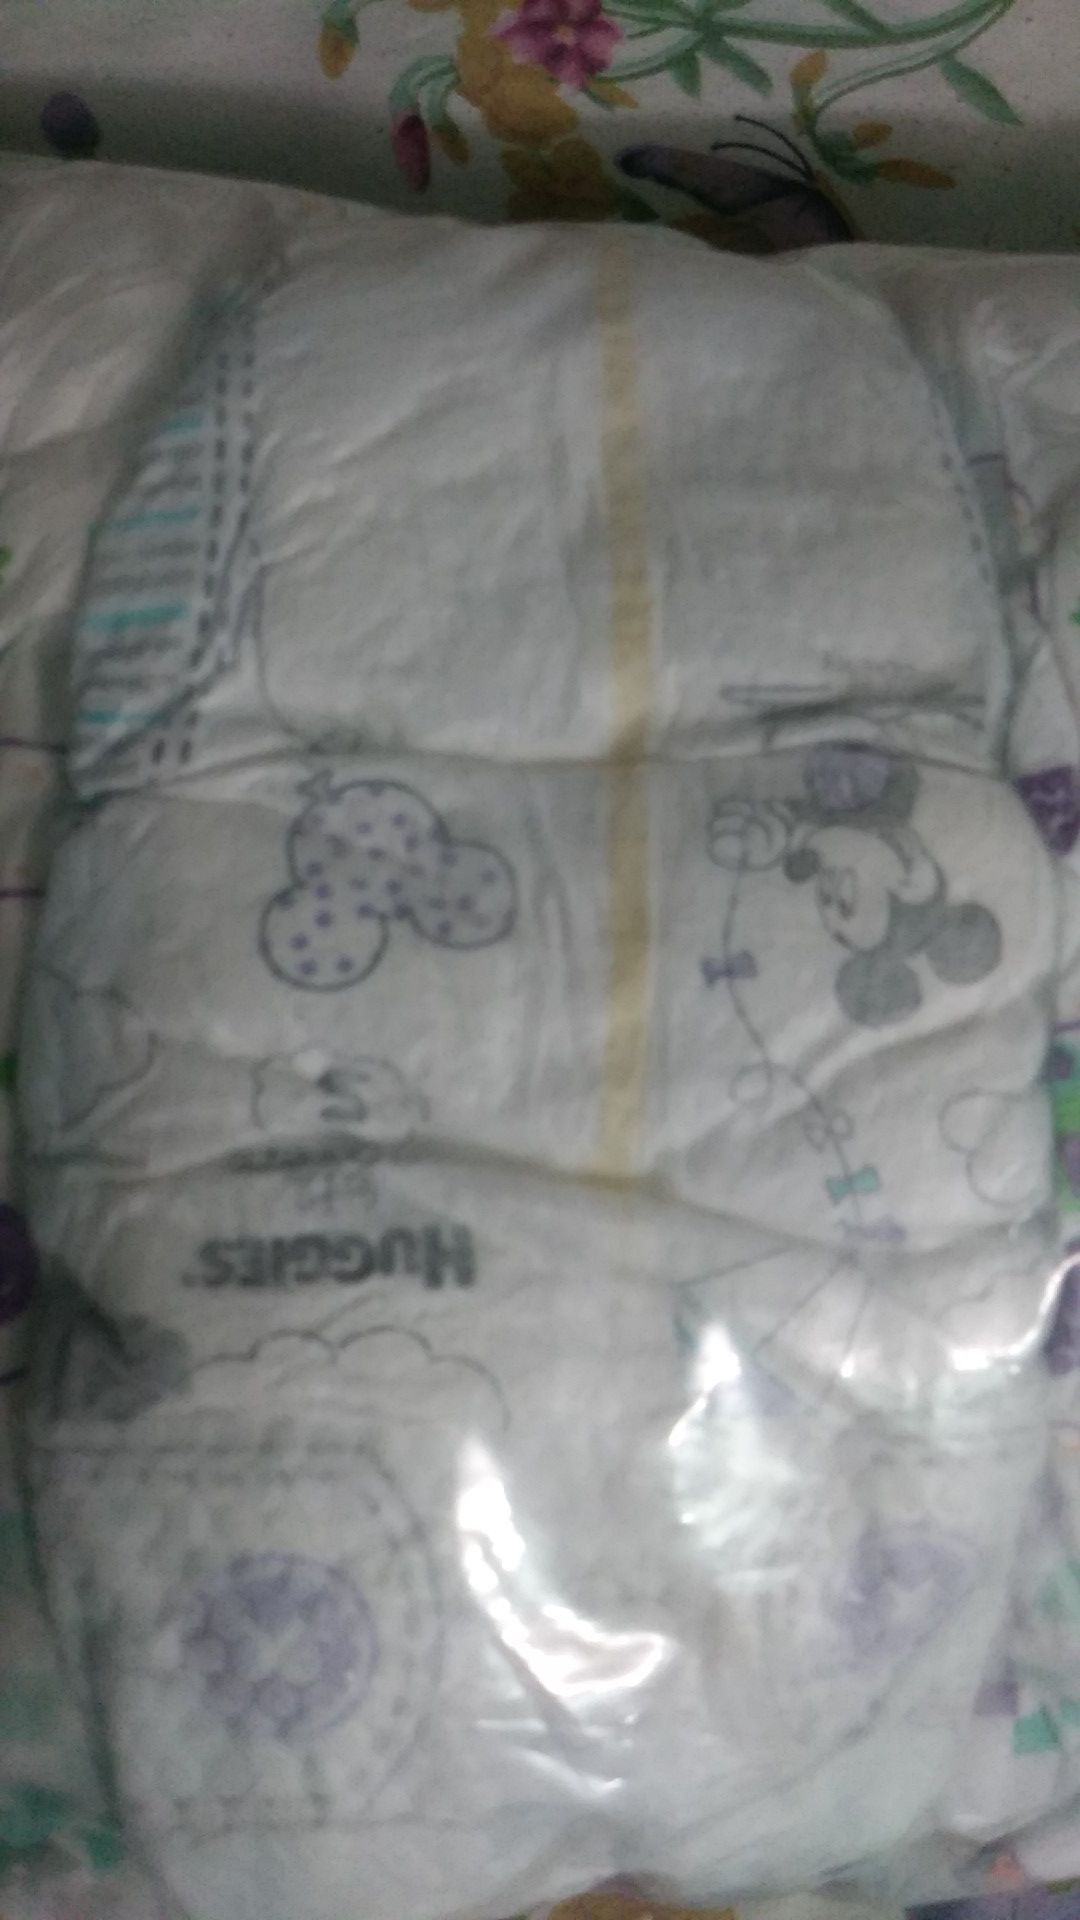 Pampers talla 5